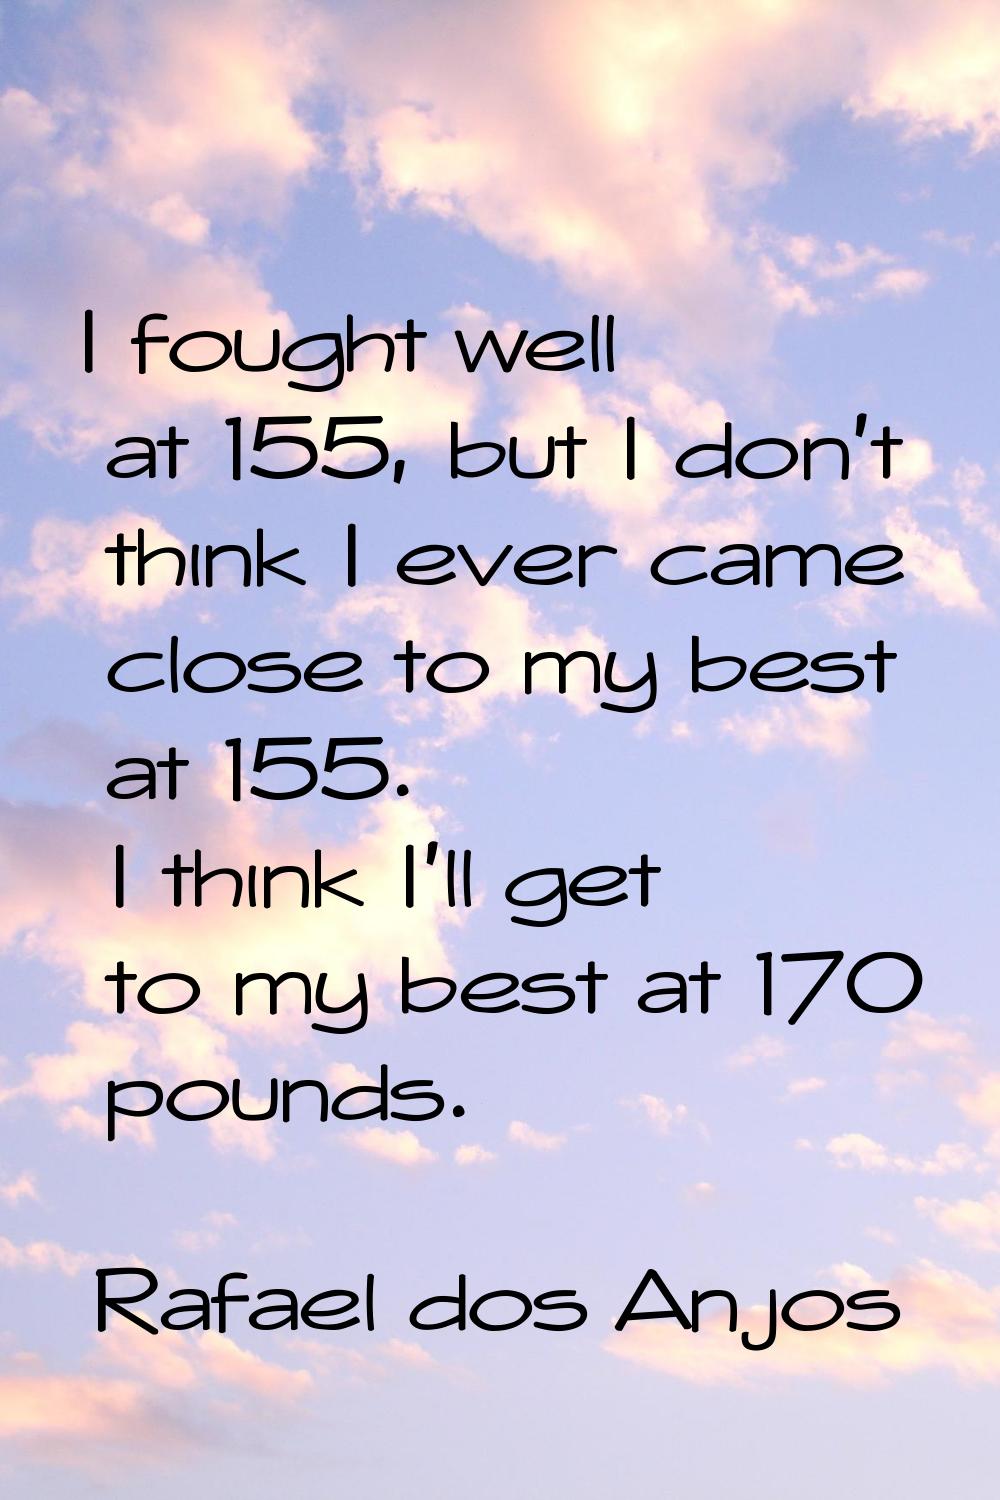 I fought well at 155, but I don't think I ever came close to my best at 155. I think I'll get to my